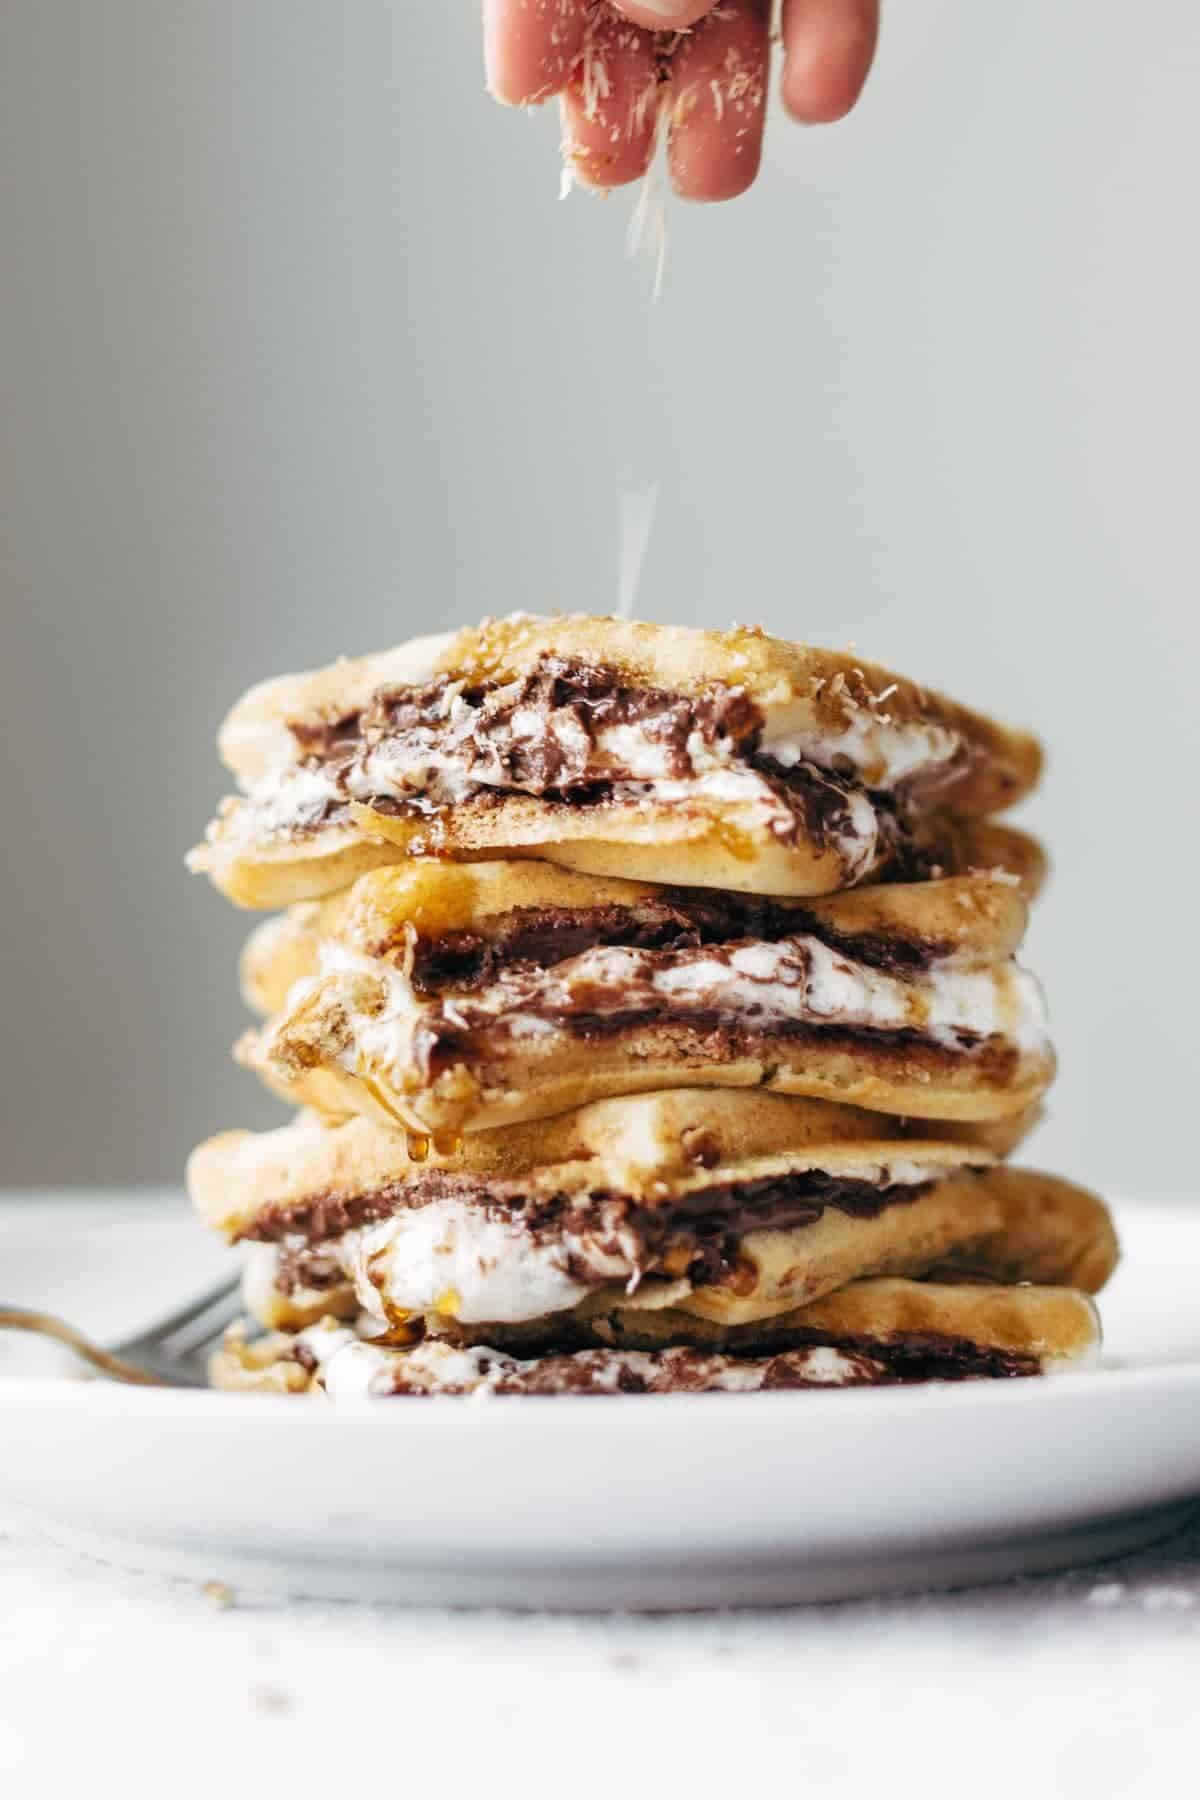 Smores Waffles with Nutella and Toasted Coconut - HELLO LOVER. brunch dreams coming true! | pinchofyum.com